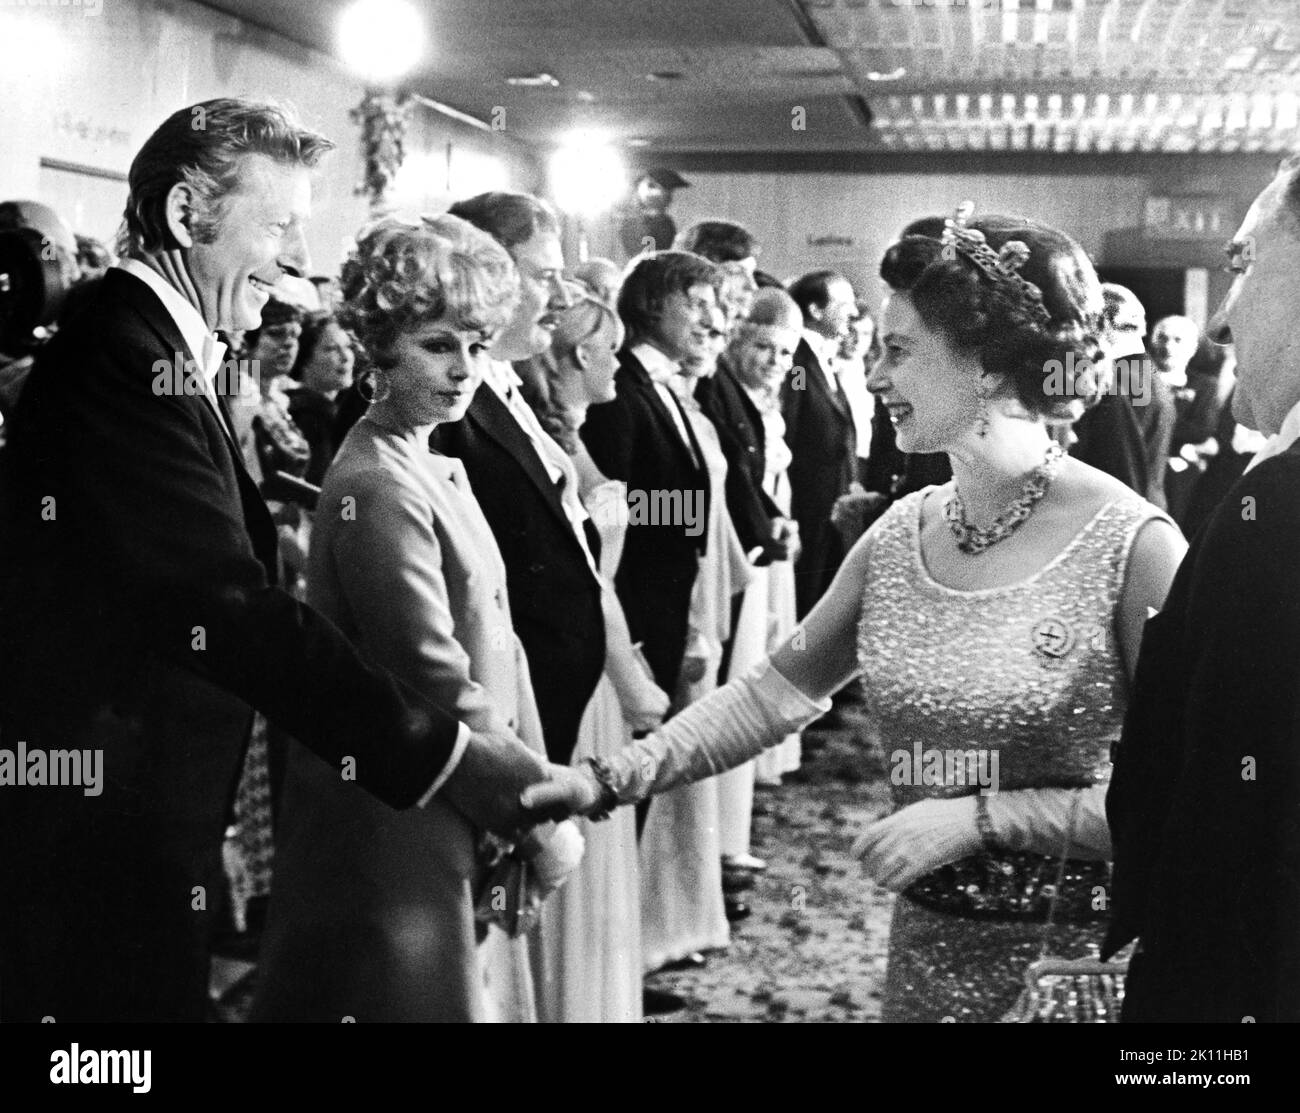 Danny Kaye shaking the Hand of Queen Elizabeth II, London, England, UK, The Danny Kaye and Sylvia Fine Collection, March 4, 1968 Stock Photo